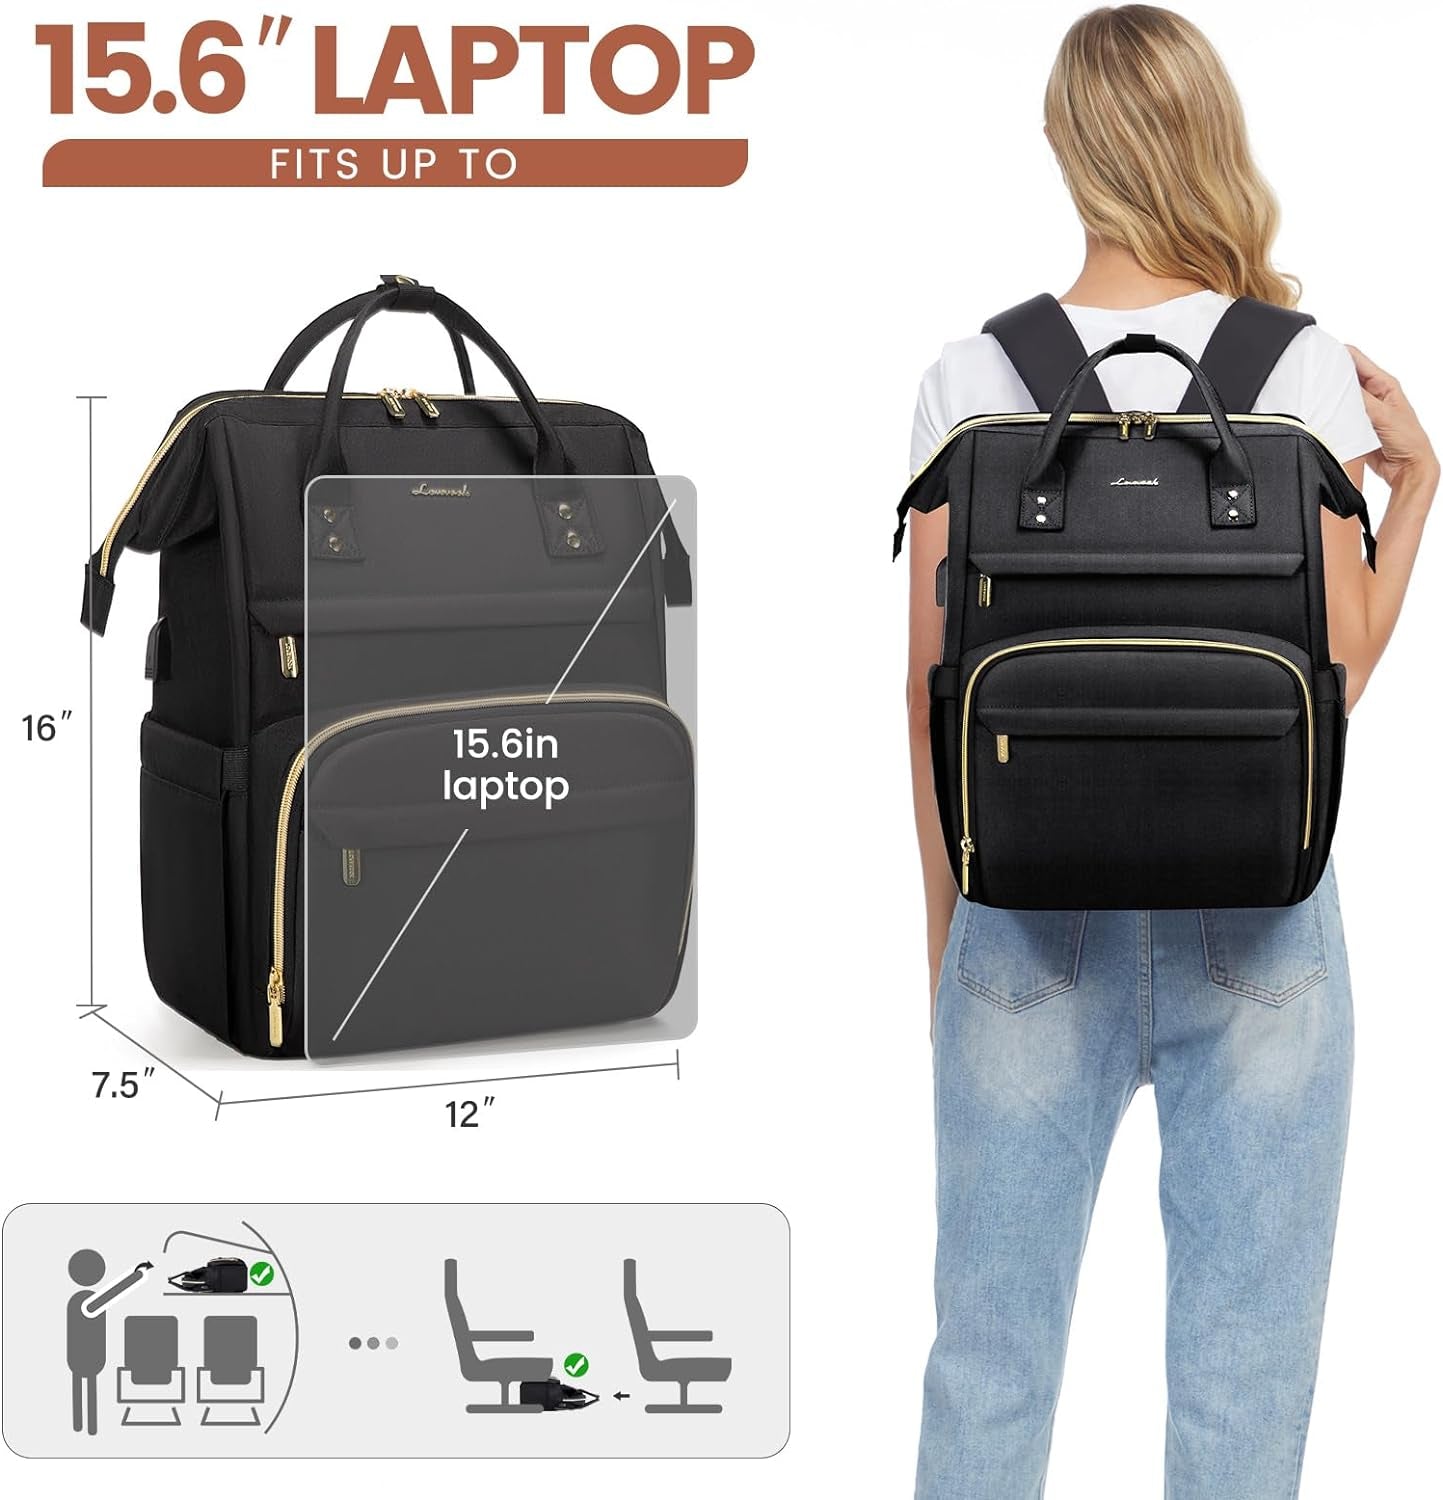 Laptop Backpack,15.6 Inch Professional Womens Purse Computer Bag Nurse Teacher Backpack,Waterproof College Work Bags Carry on Travel Back Pack with USB Port,Black